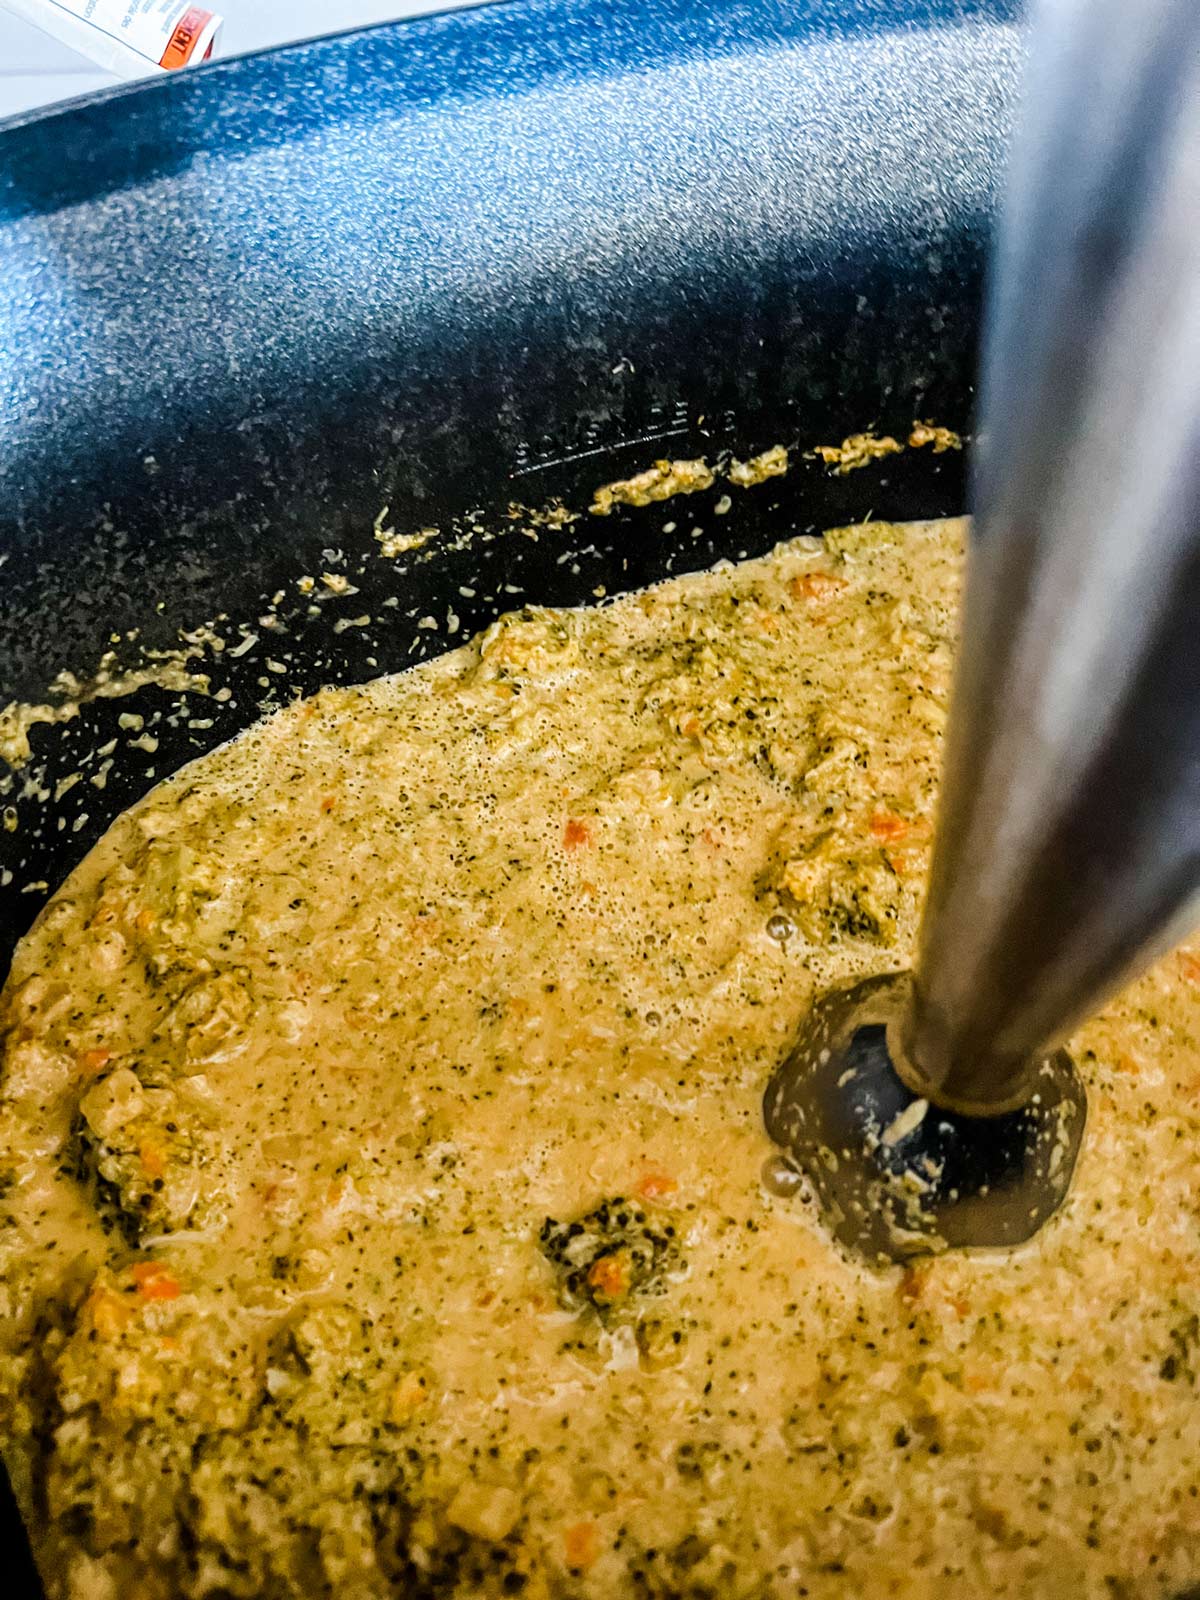 An immersion blender blending broccoli cheese soup in a slow cooker.